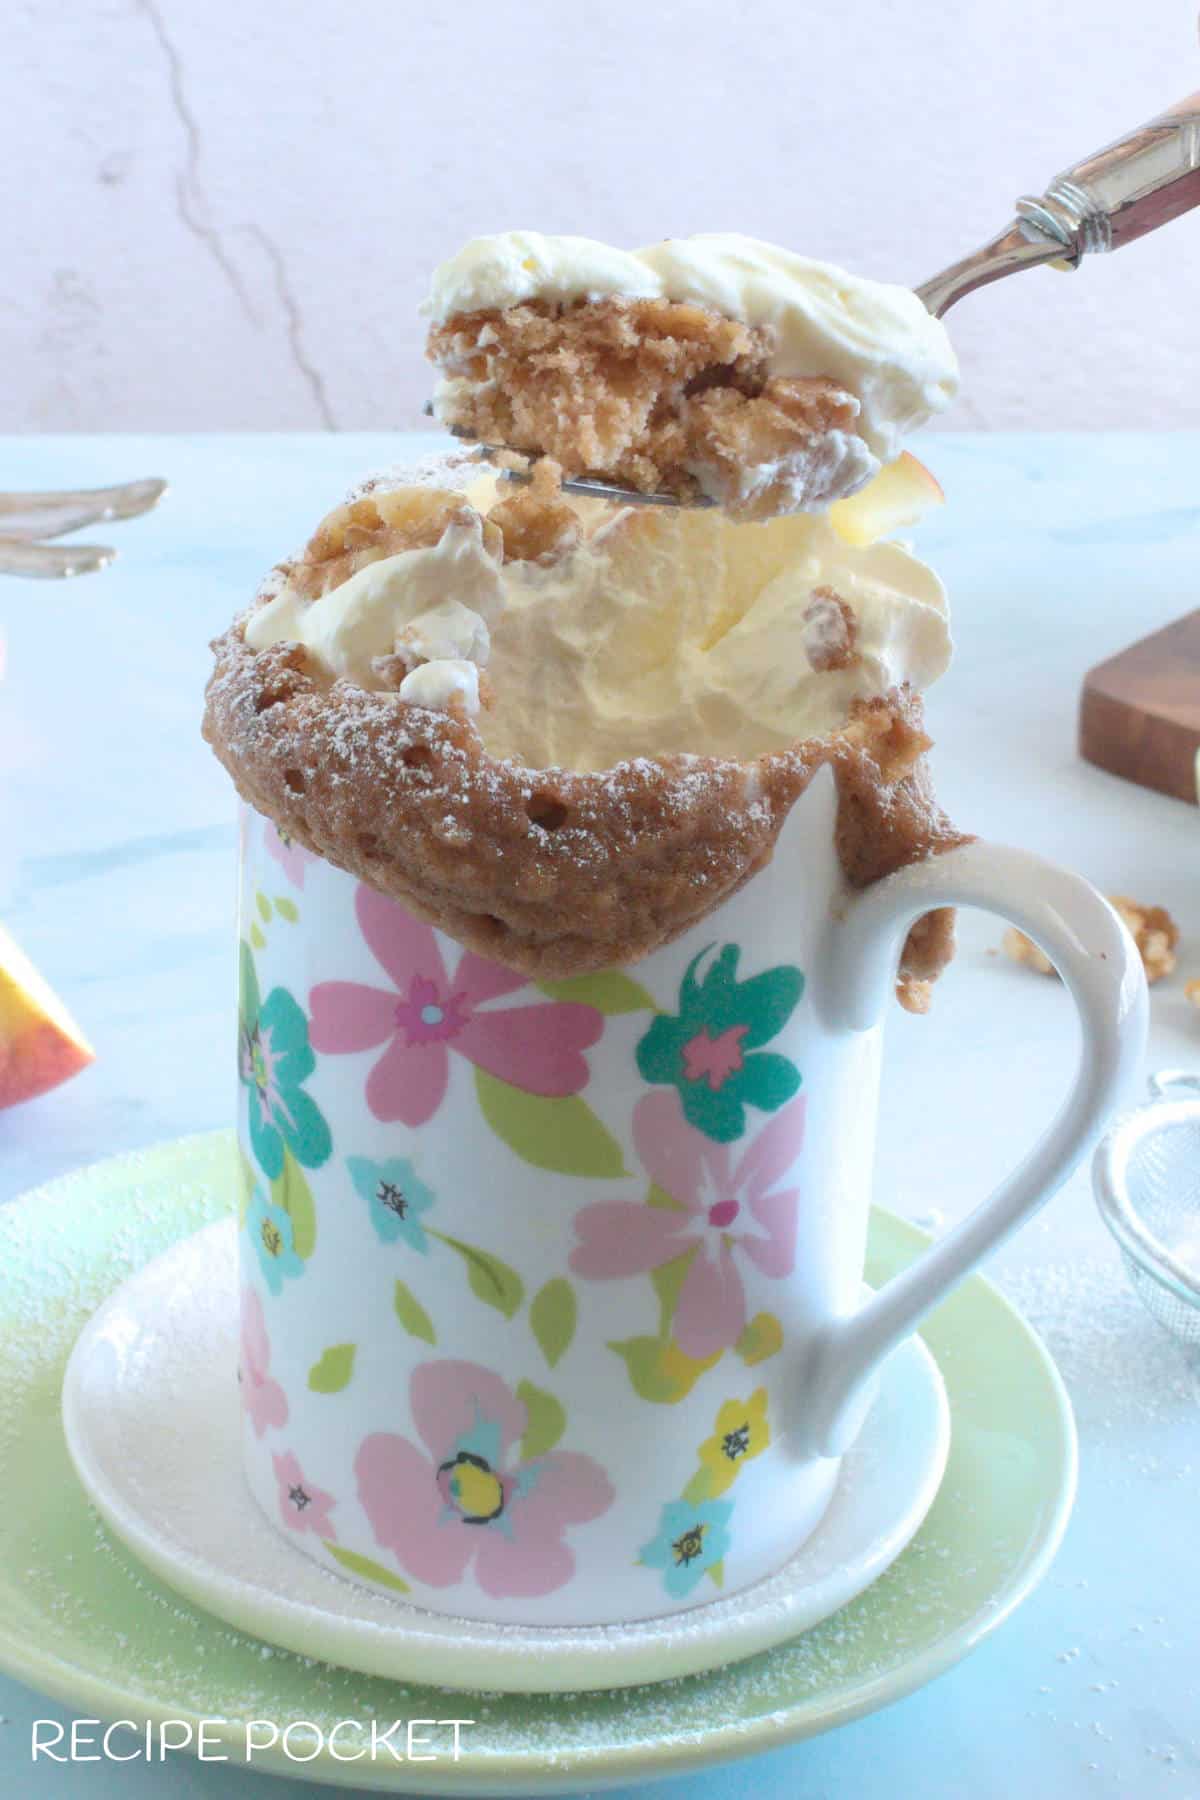 A mug cake being eaten with a fork.